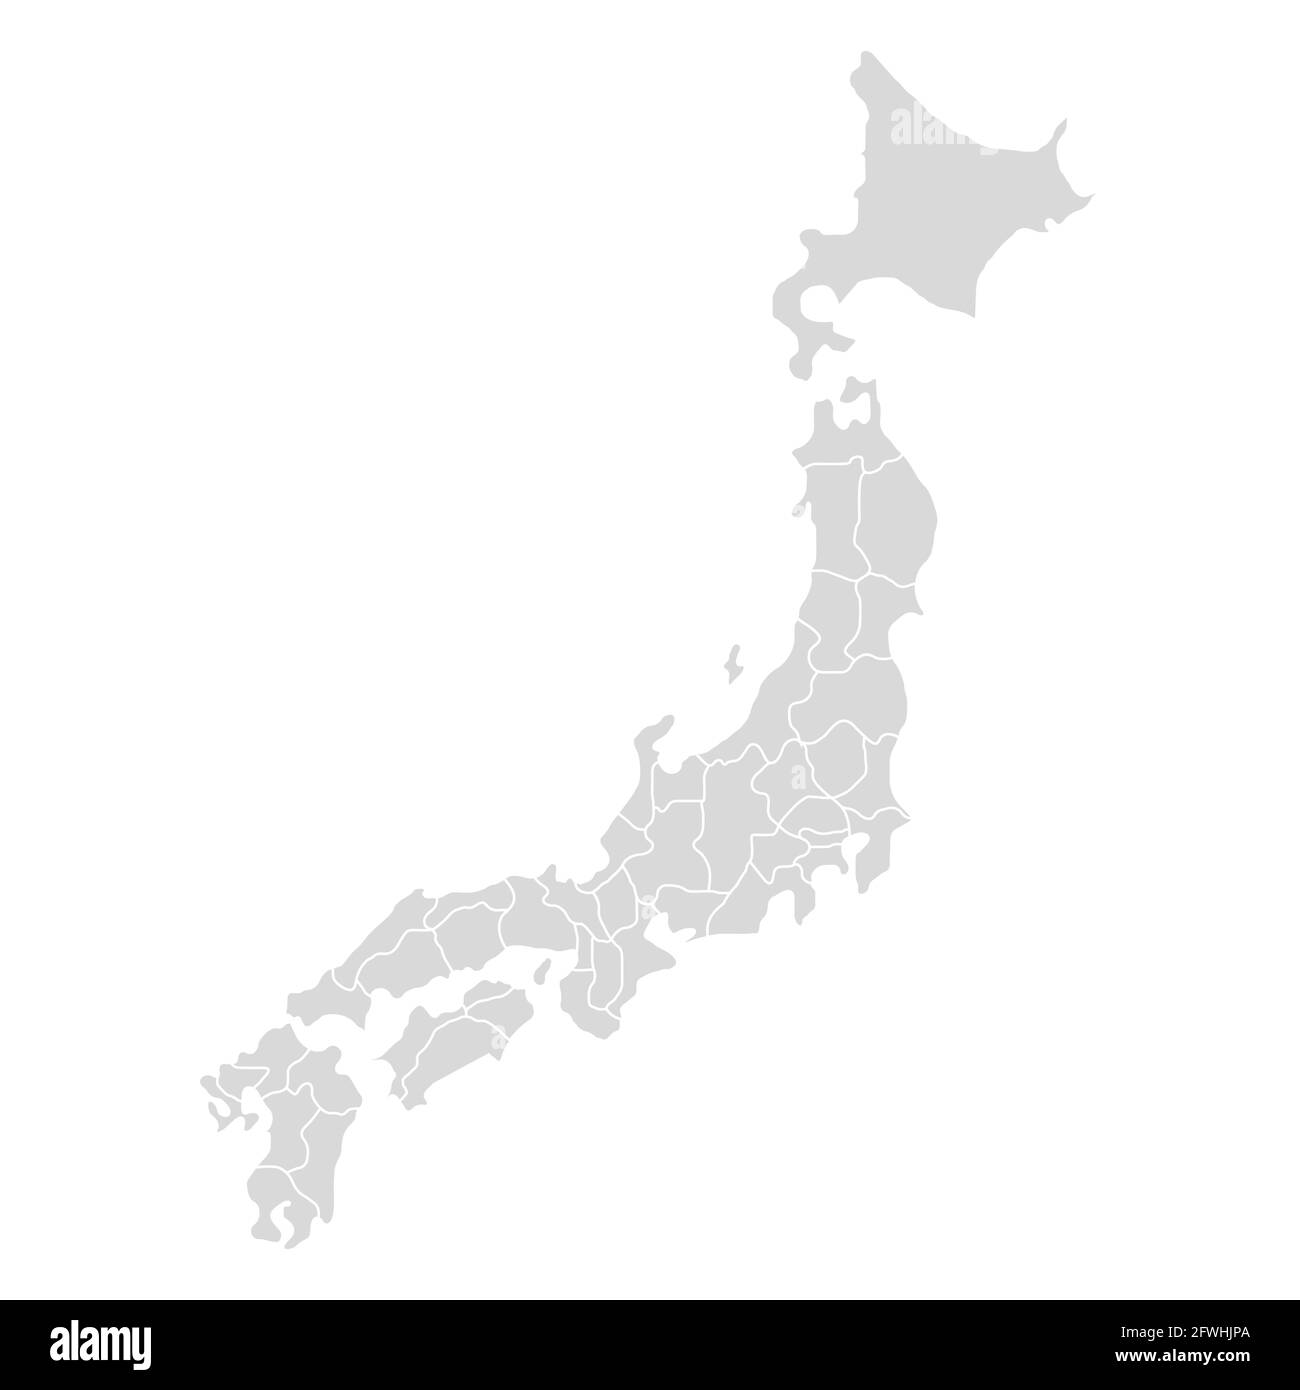 Japan vector map icon. Hokkaido ai detailed country map. Japan asia map isolated Stock Vector